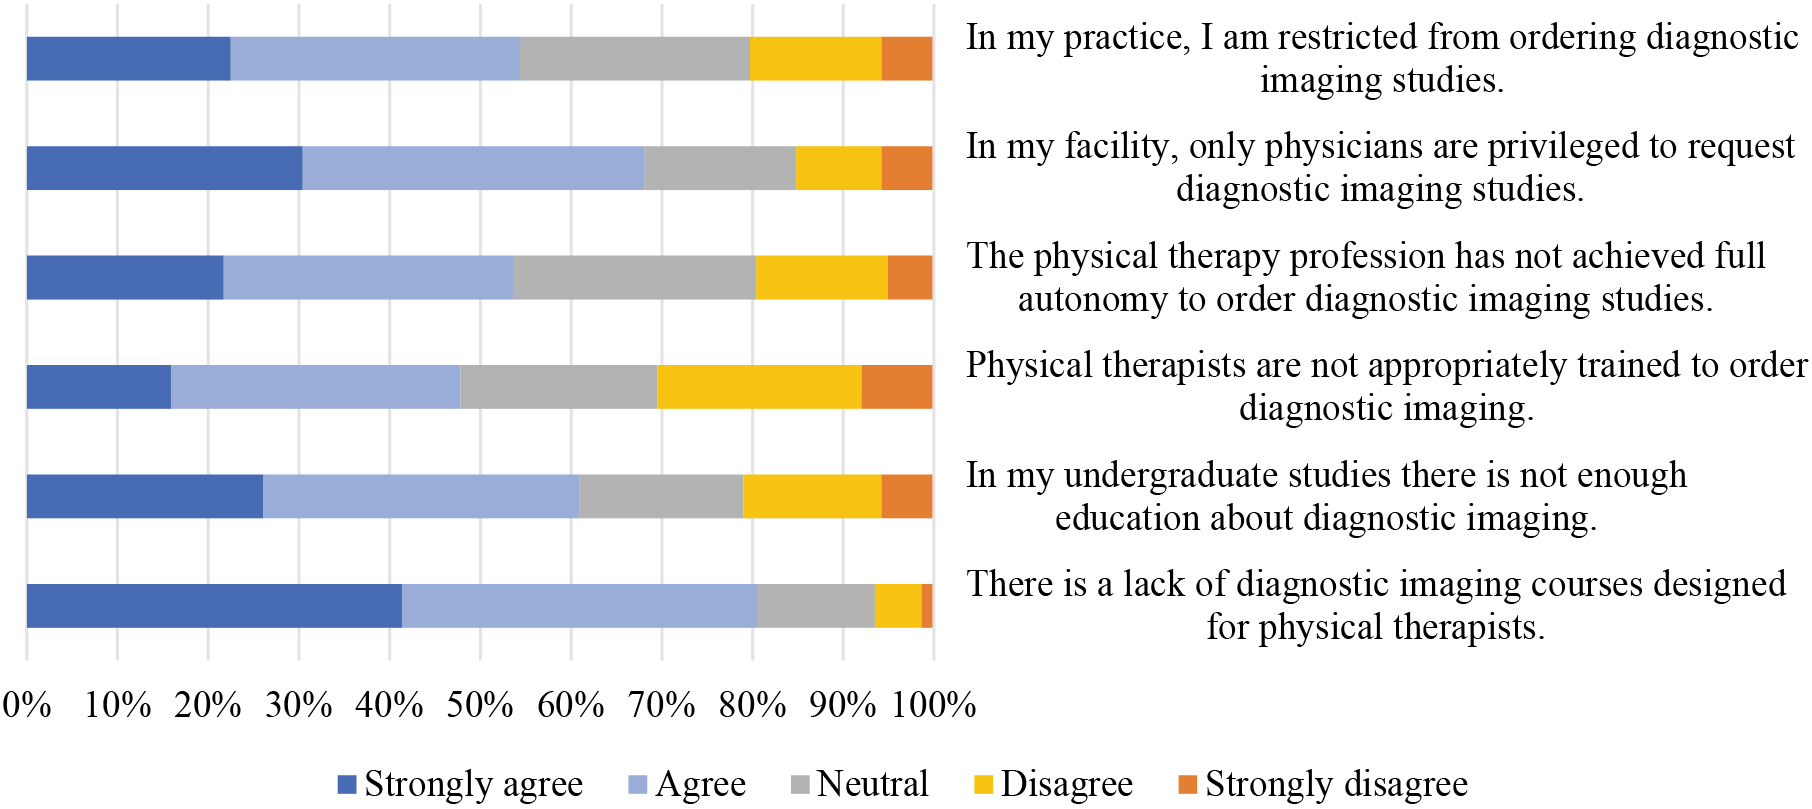 Barriers towards DI from policies, practice autonomy, and education as reported by the PTs (N= 138).